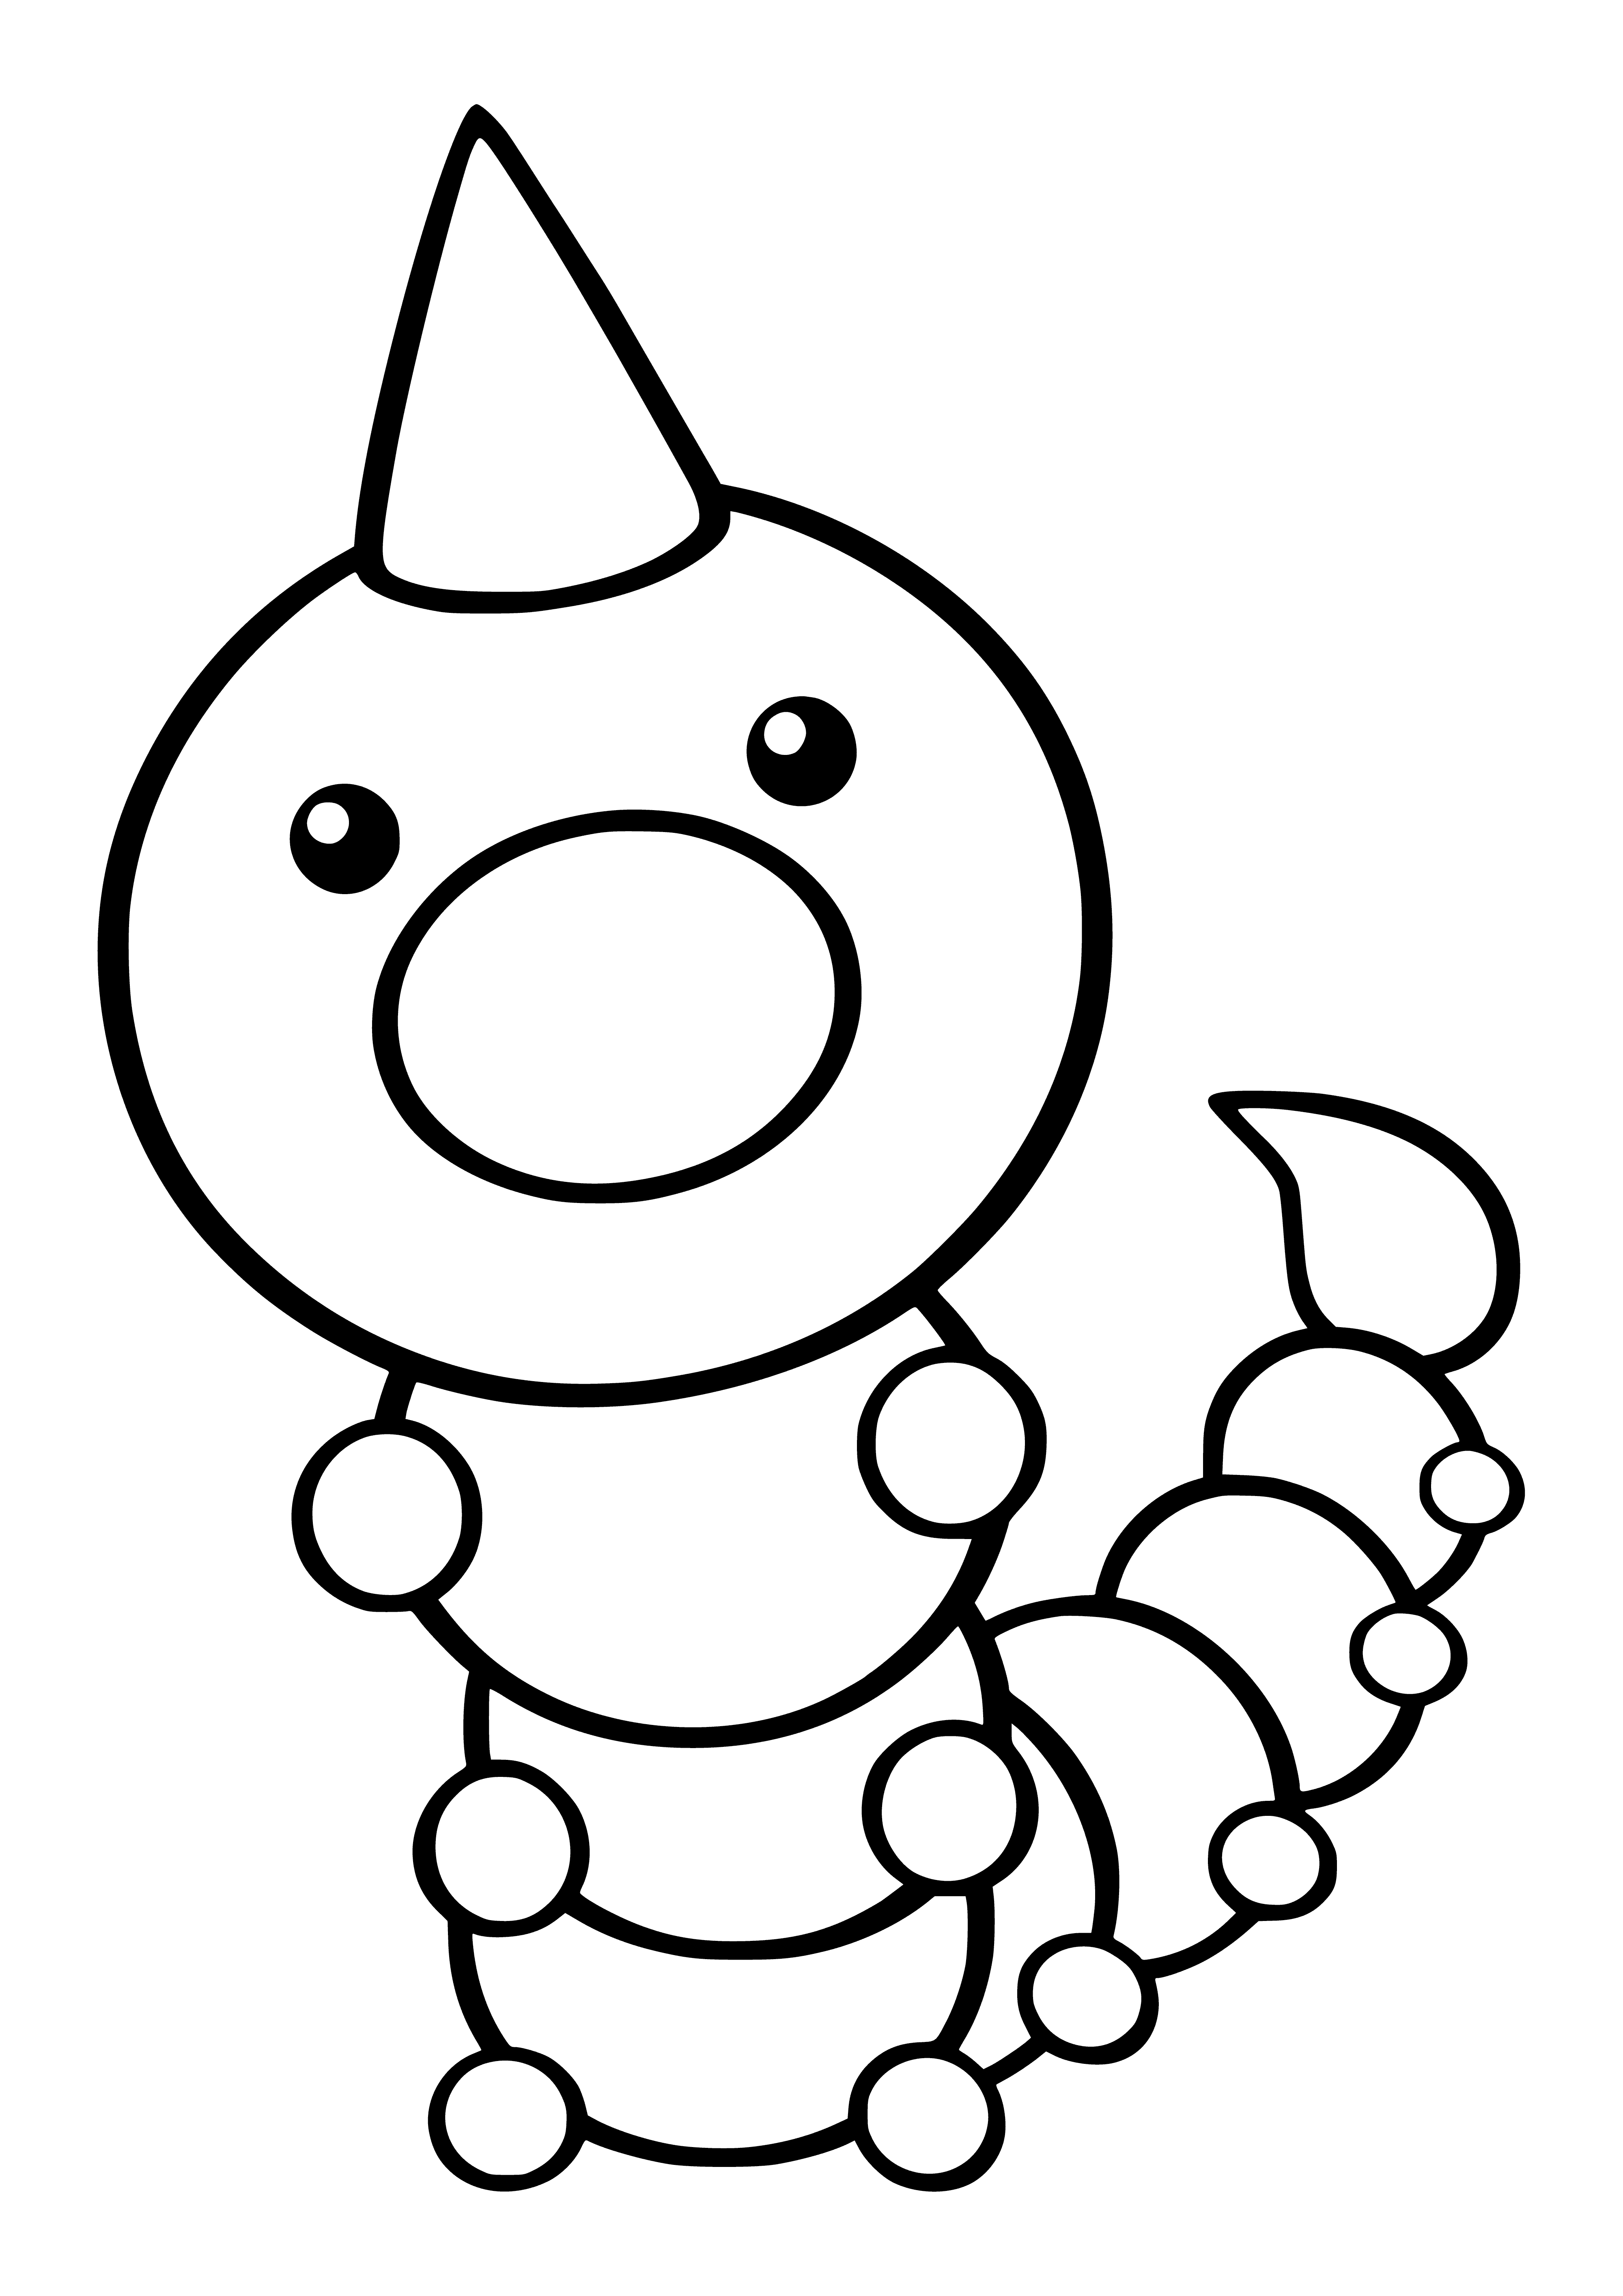 Pokemon Weedle coloring page